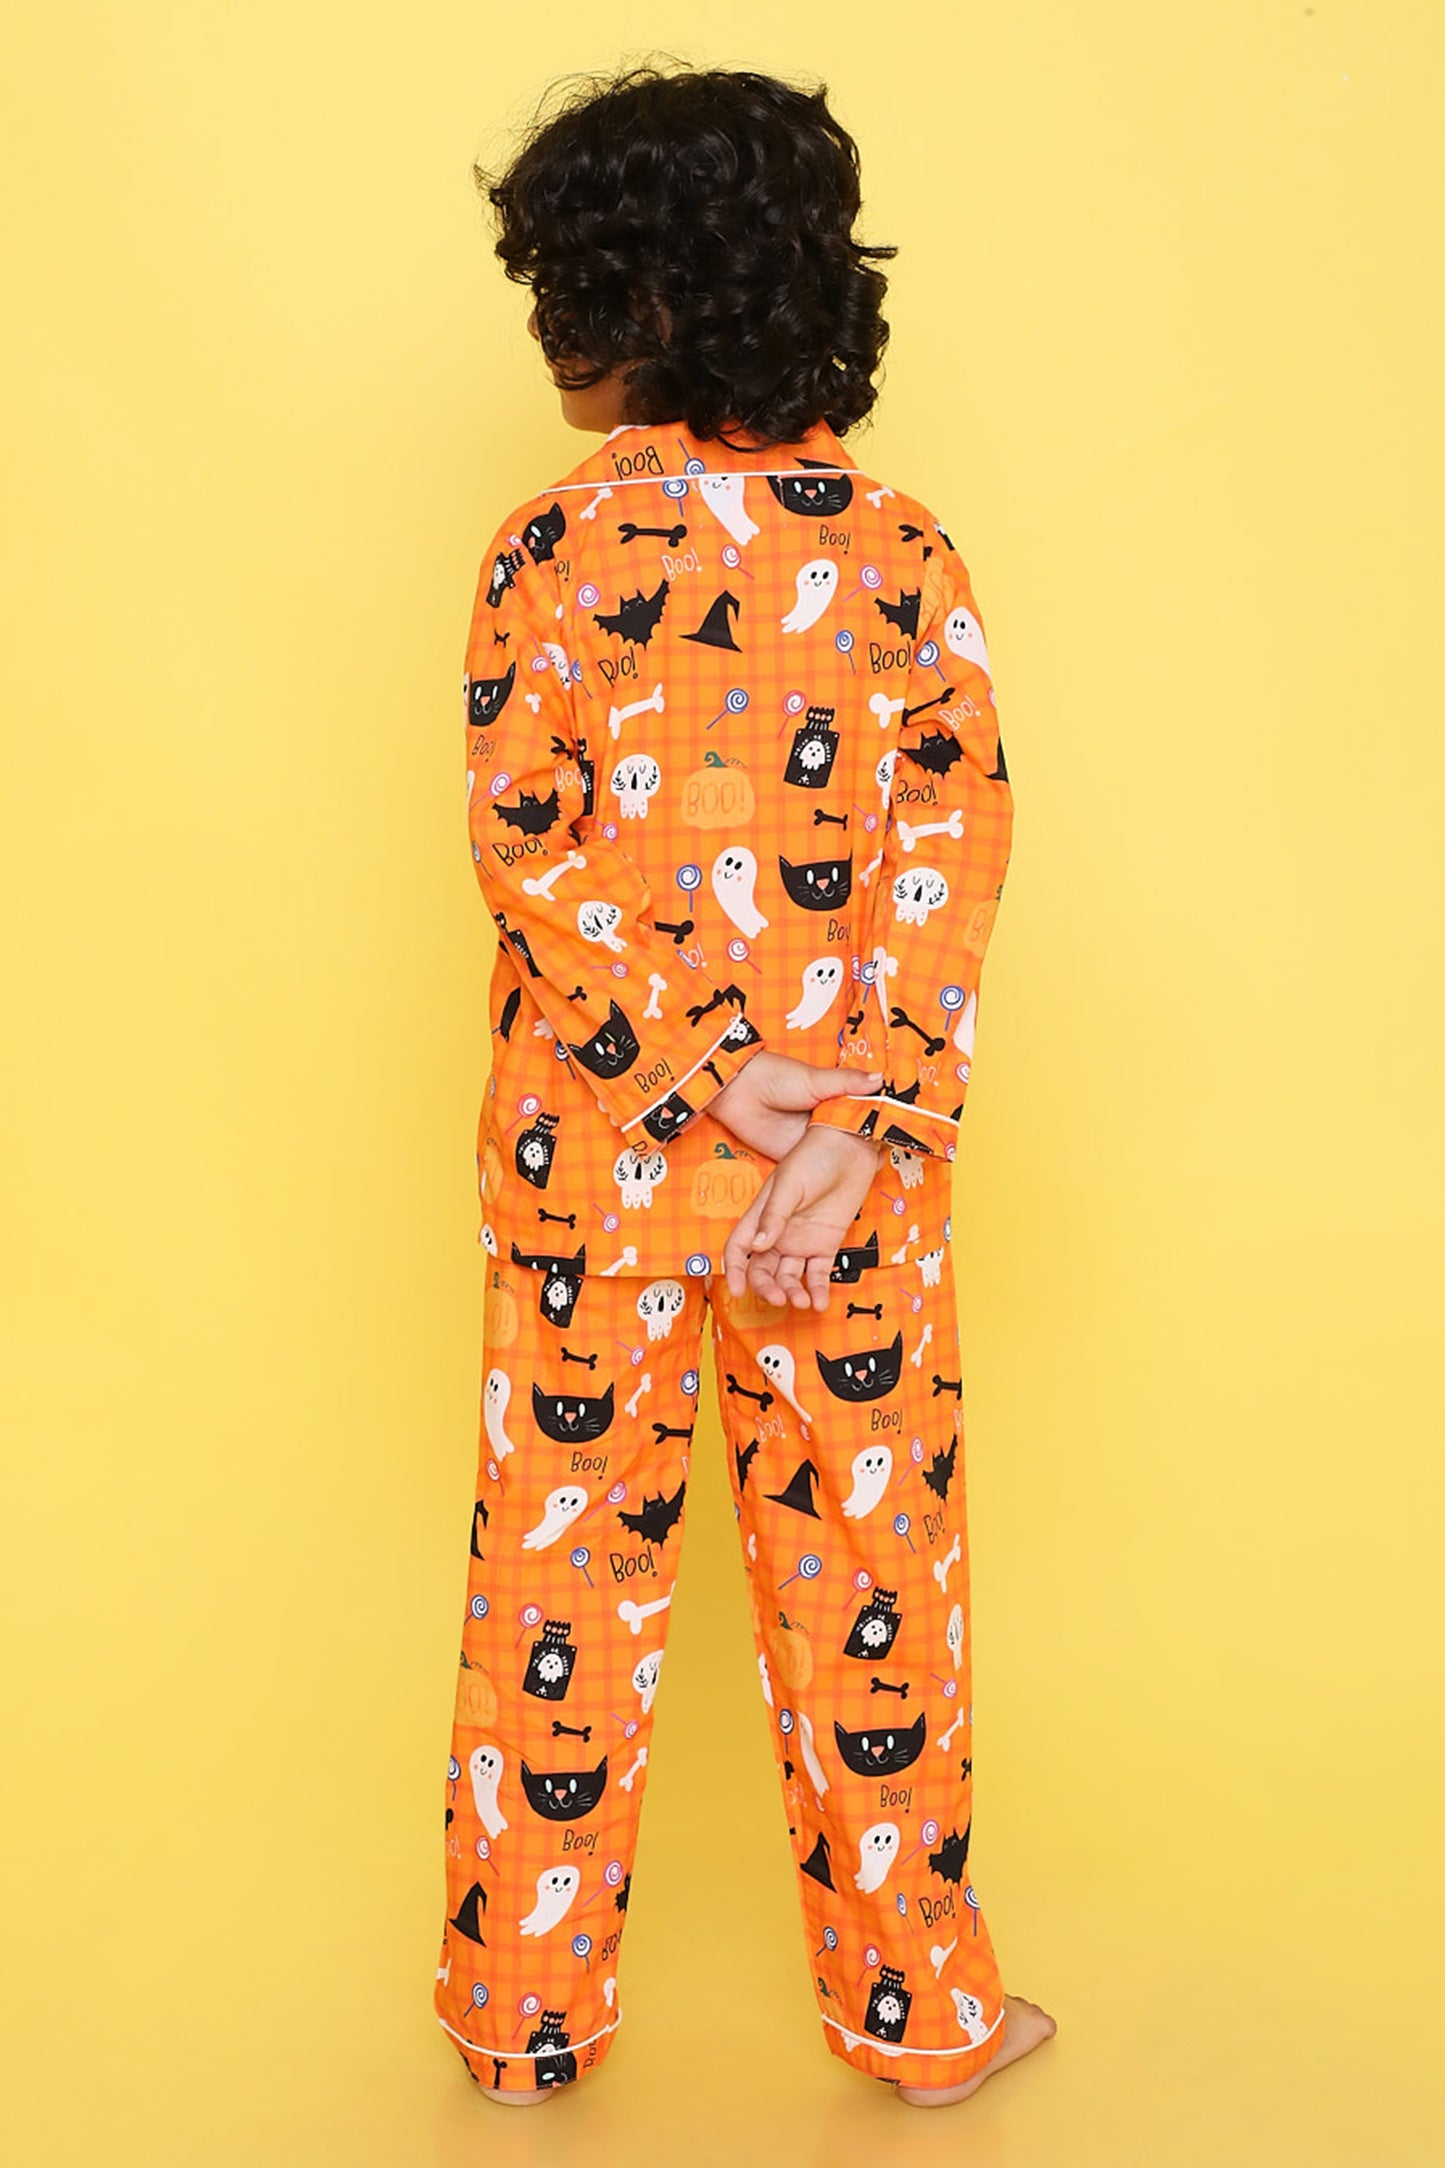 Knitting Doodles Premium cotton Kids' Notched Collar Night suit in cute haloween pumpkin and ghosts Print- Orange